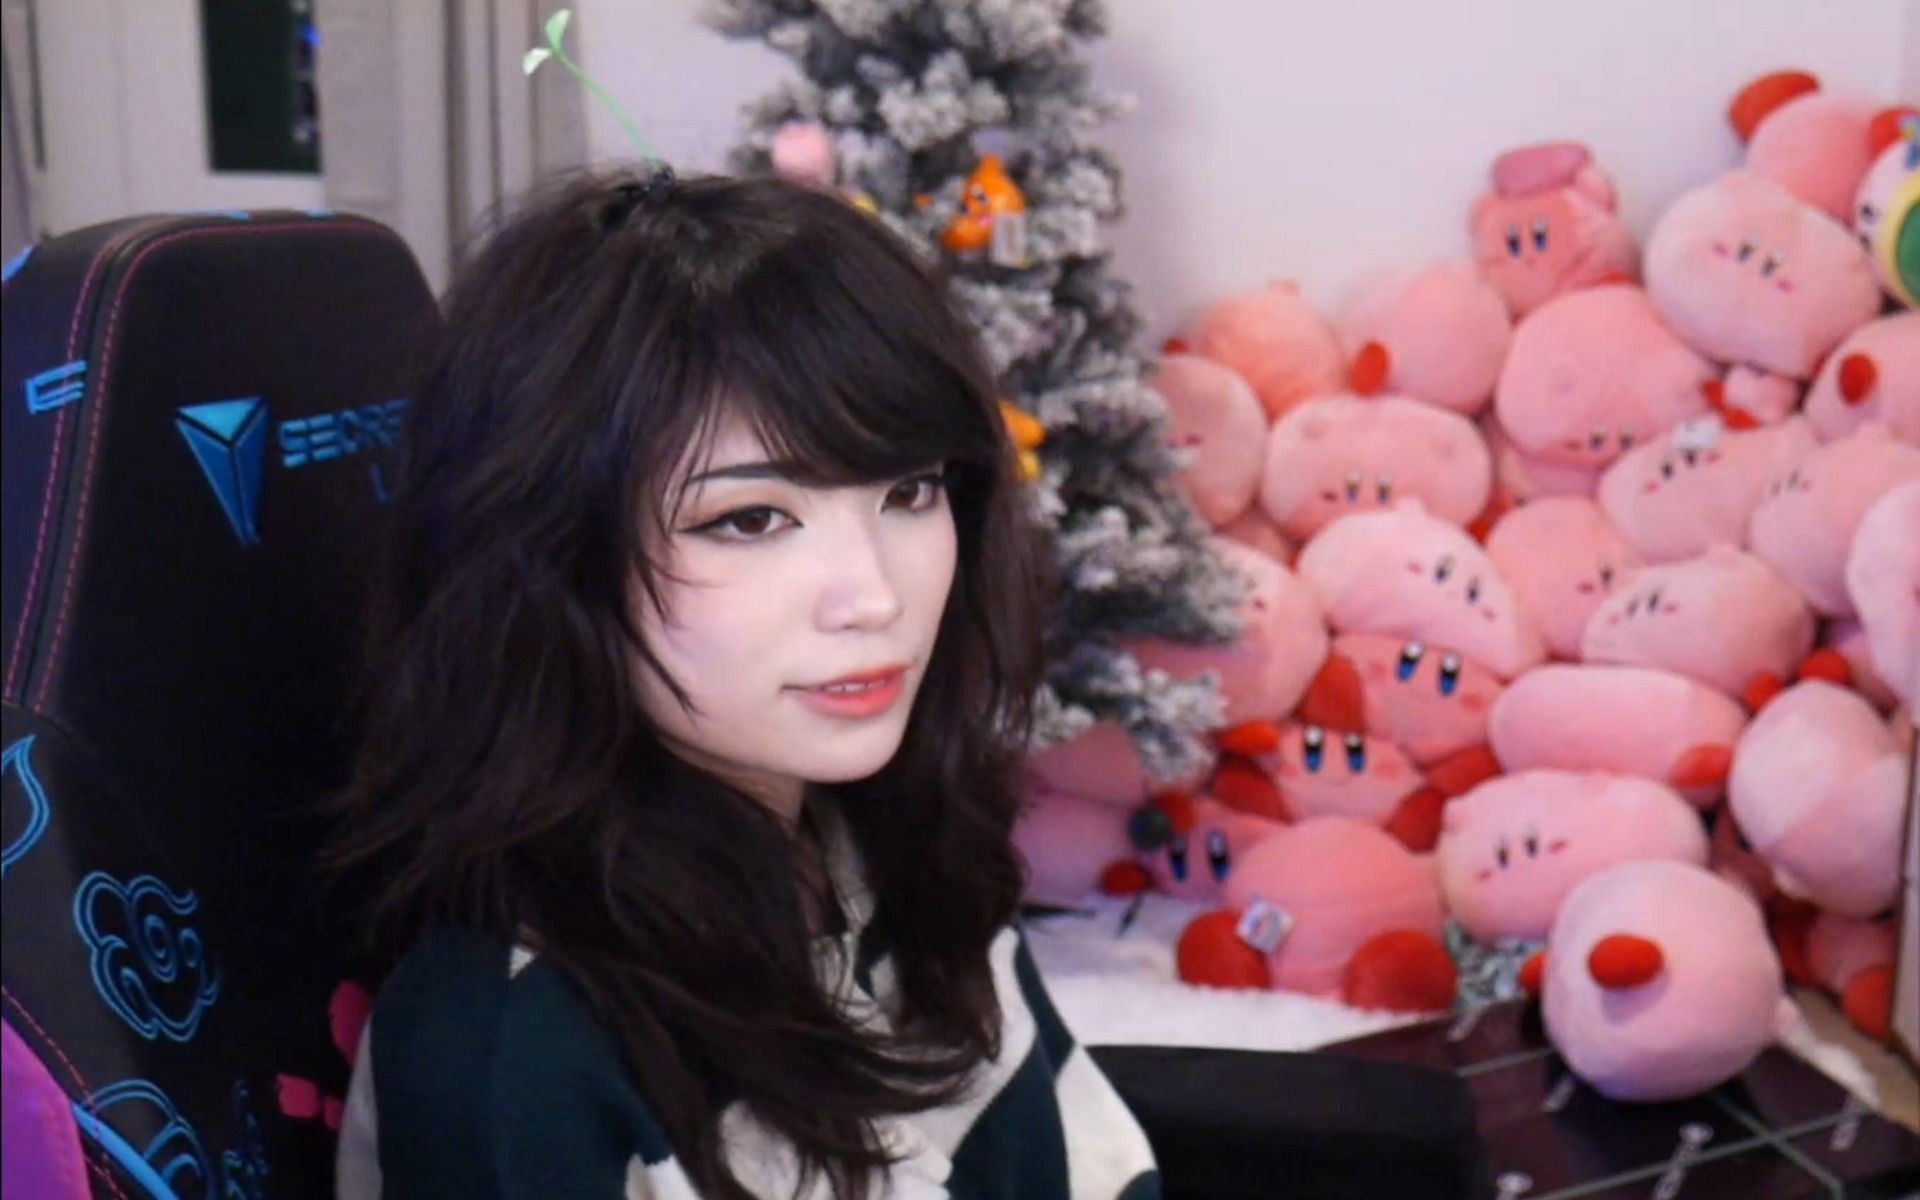 Emiru shows her Kirby plushie collection, met with surprise (Image via Twitch/Emiru)